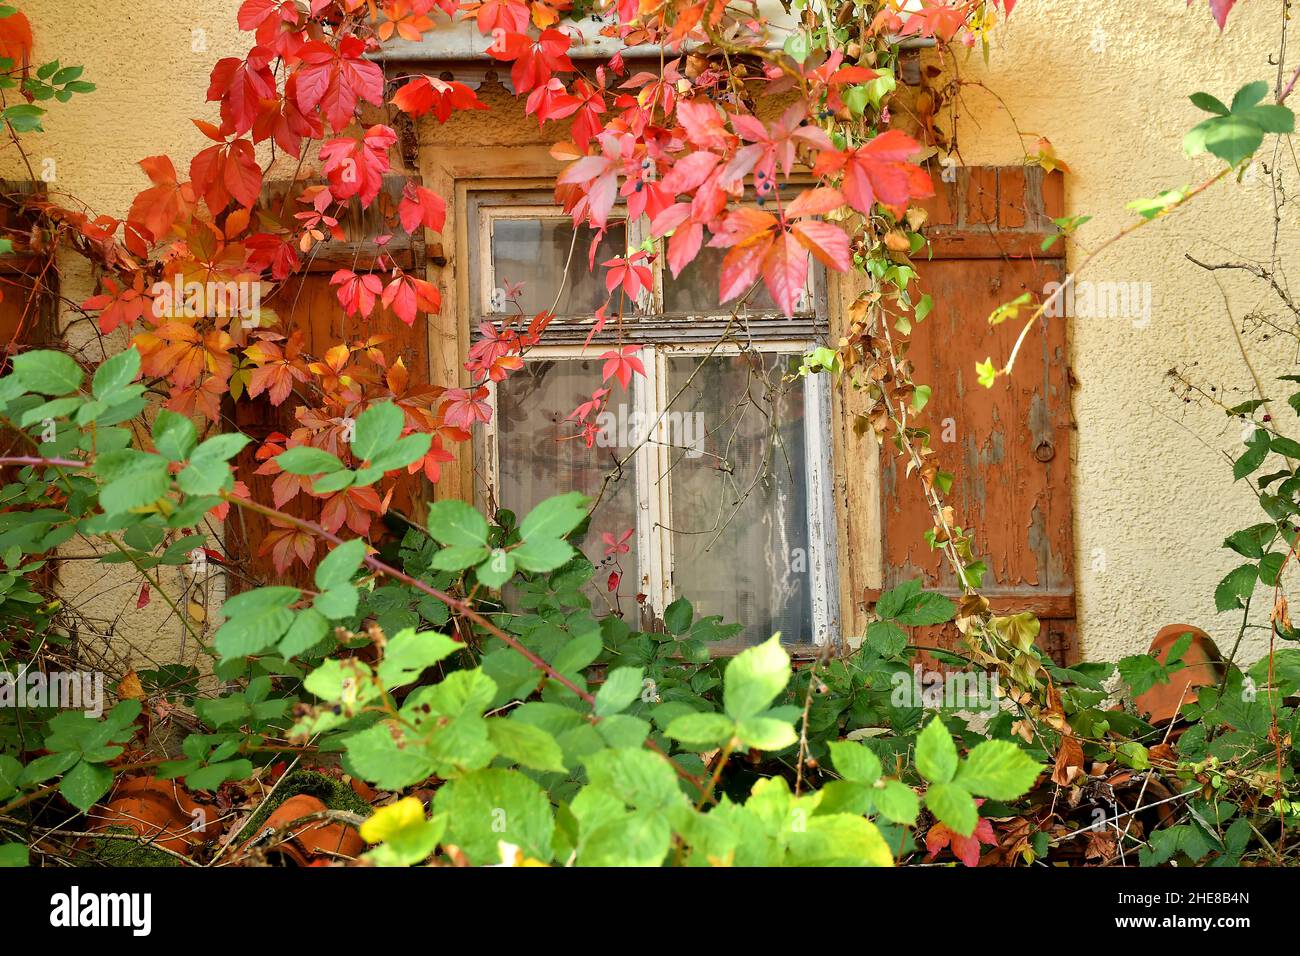 Window Of An Old House Overgrown With Wild Wine In Autumnal Colors Stock Photo